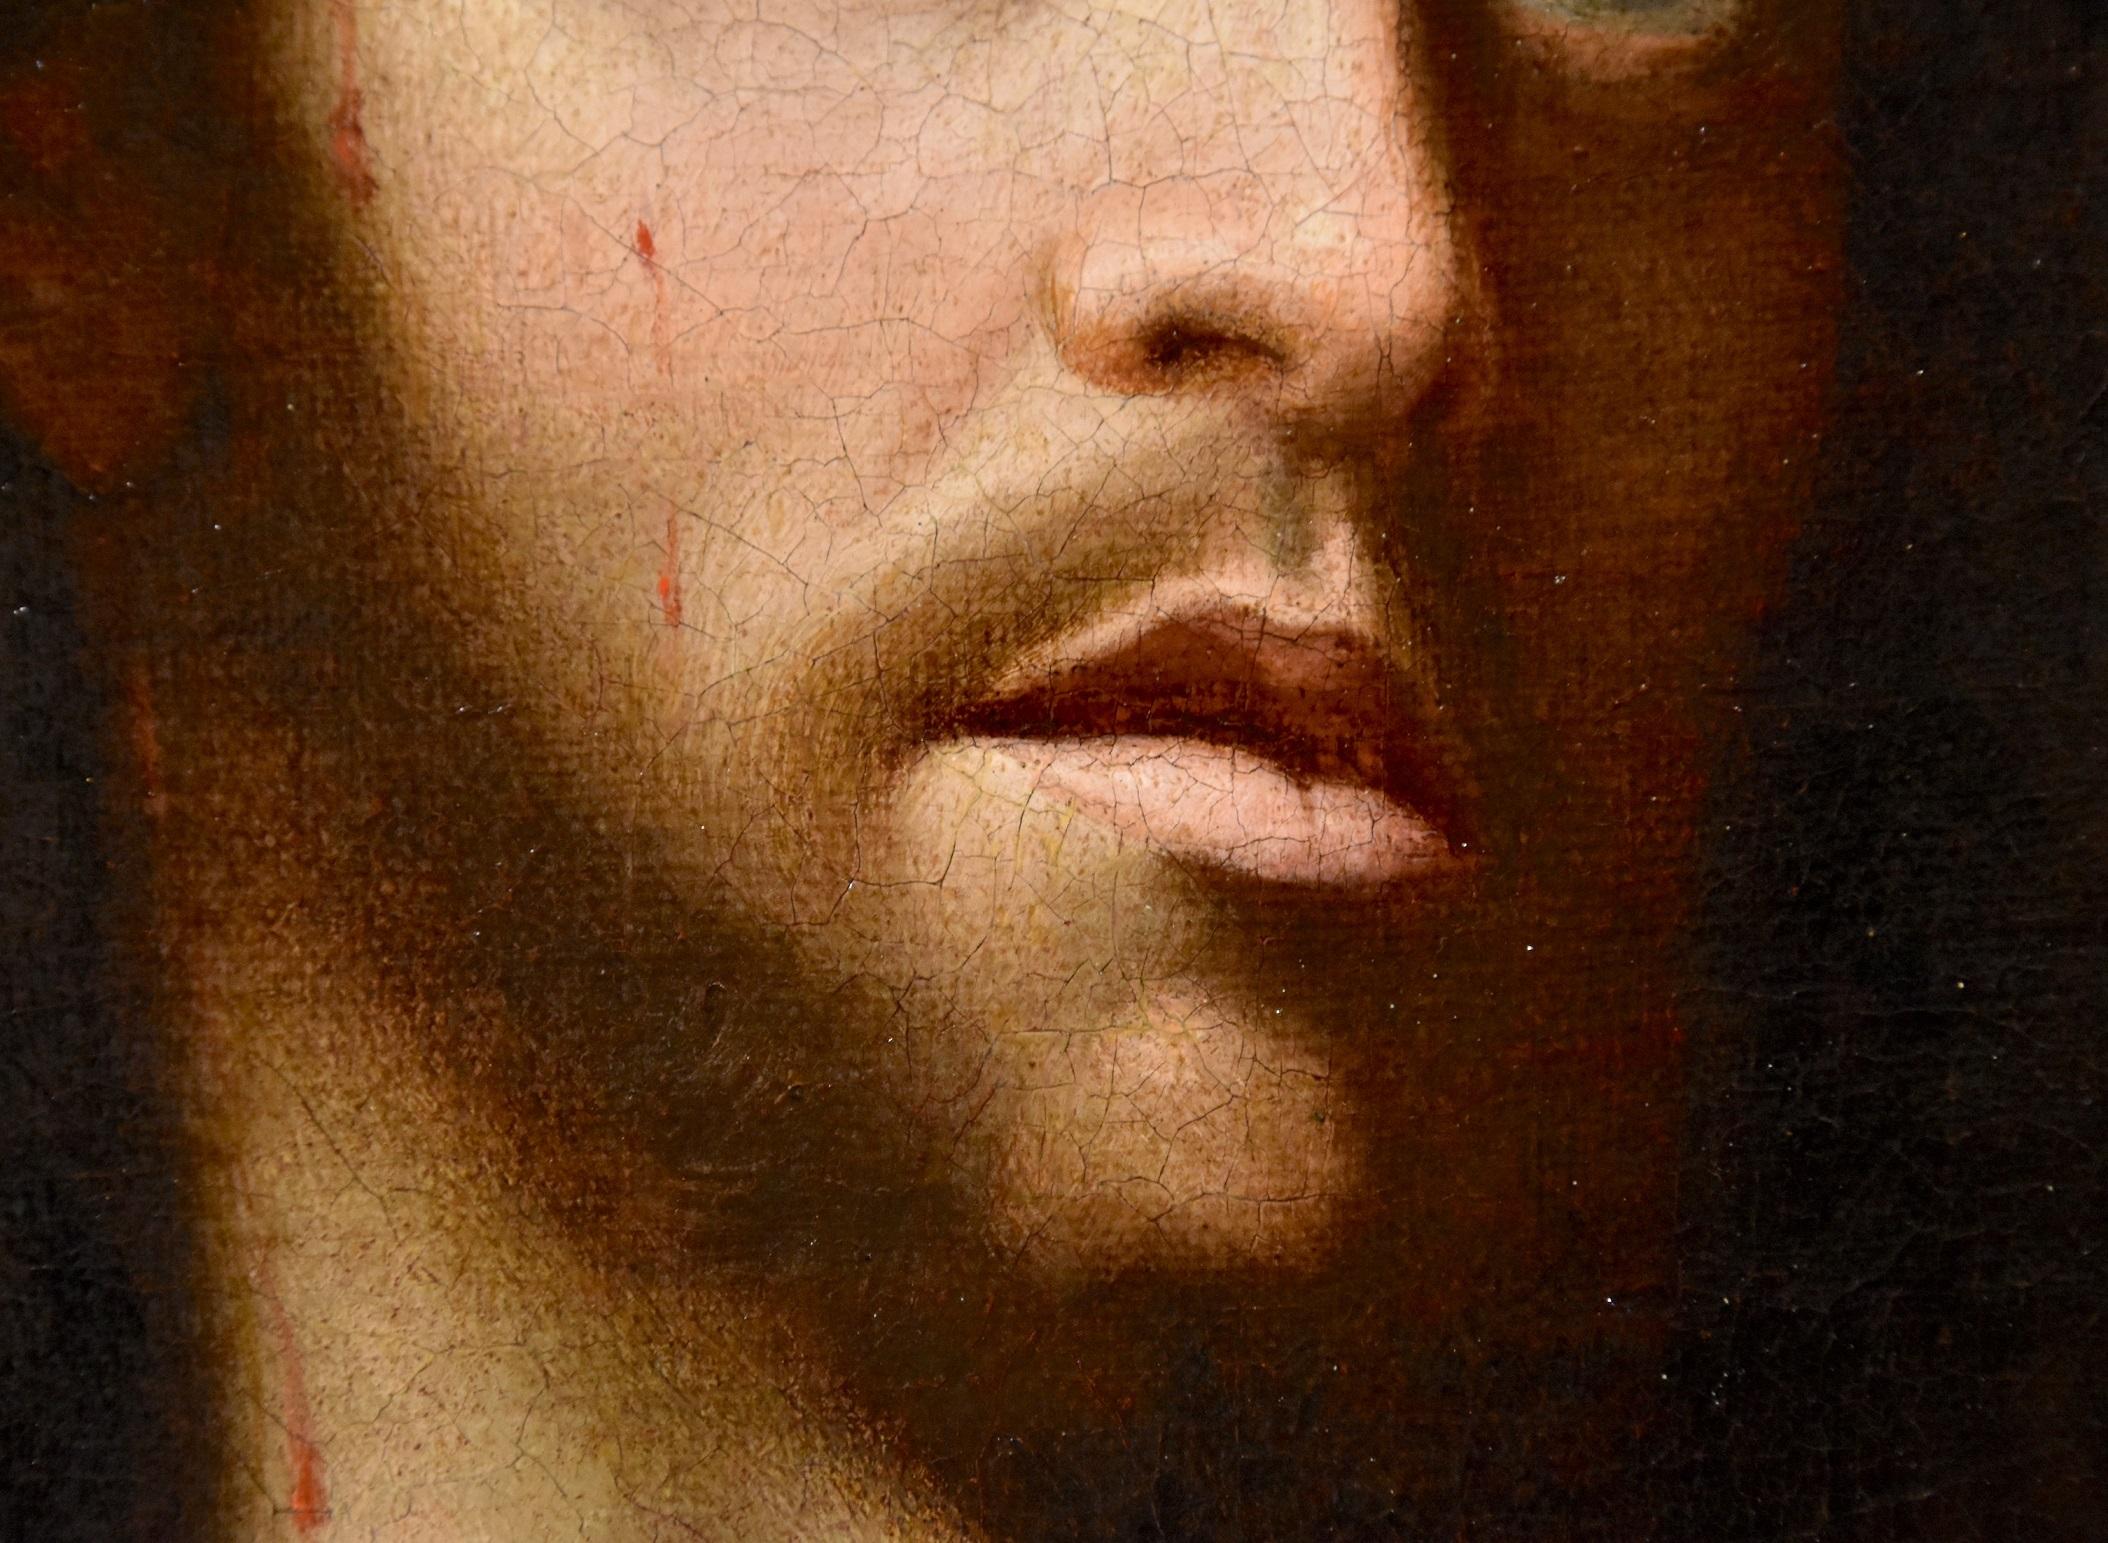 Ecce Homo Christ Paint Oil on canvas 17th Century Old master Leonardo Italian  - Brown Portrait Painting by Lombard painter of the 17th century